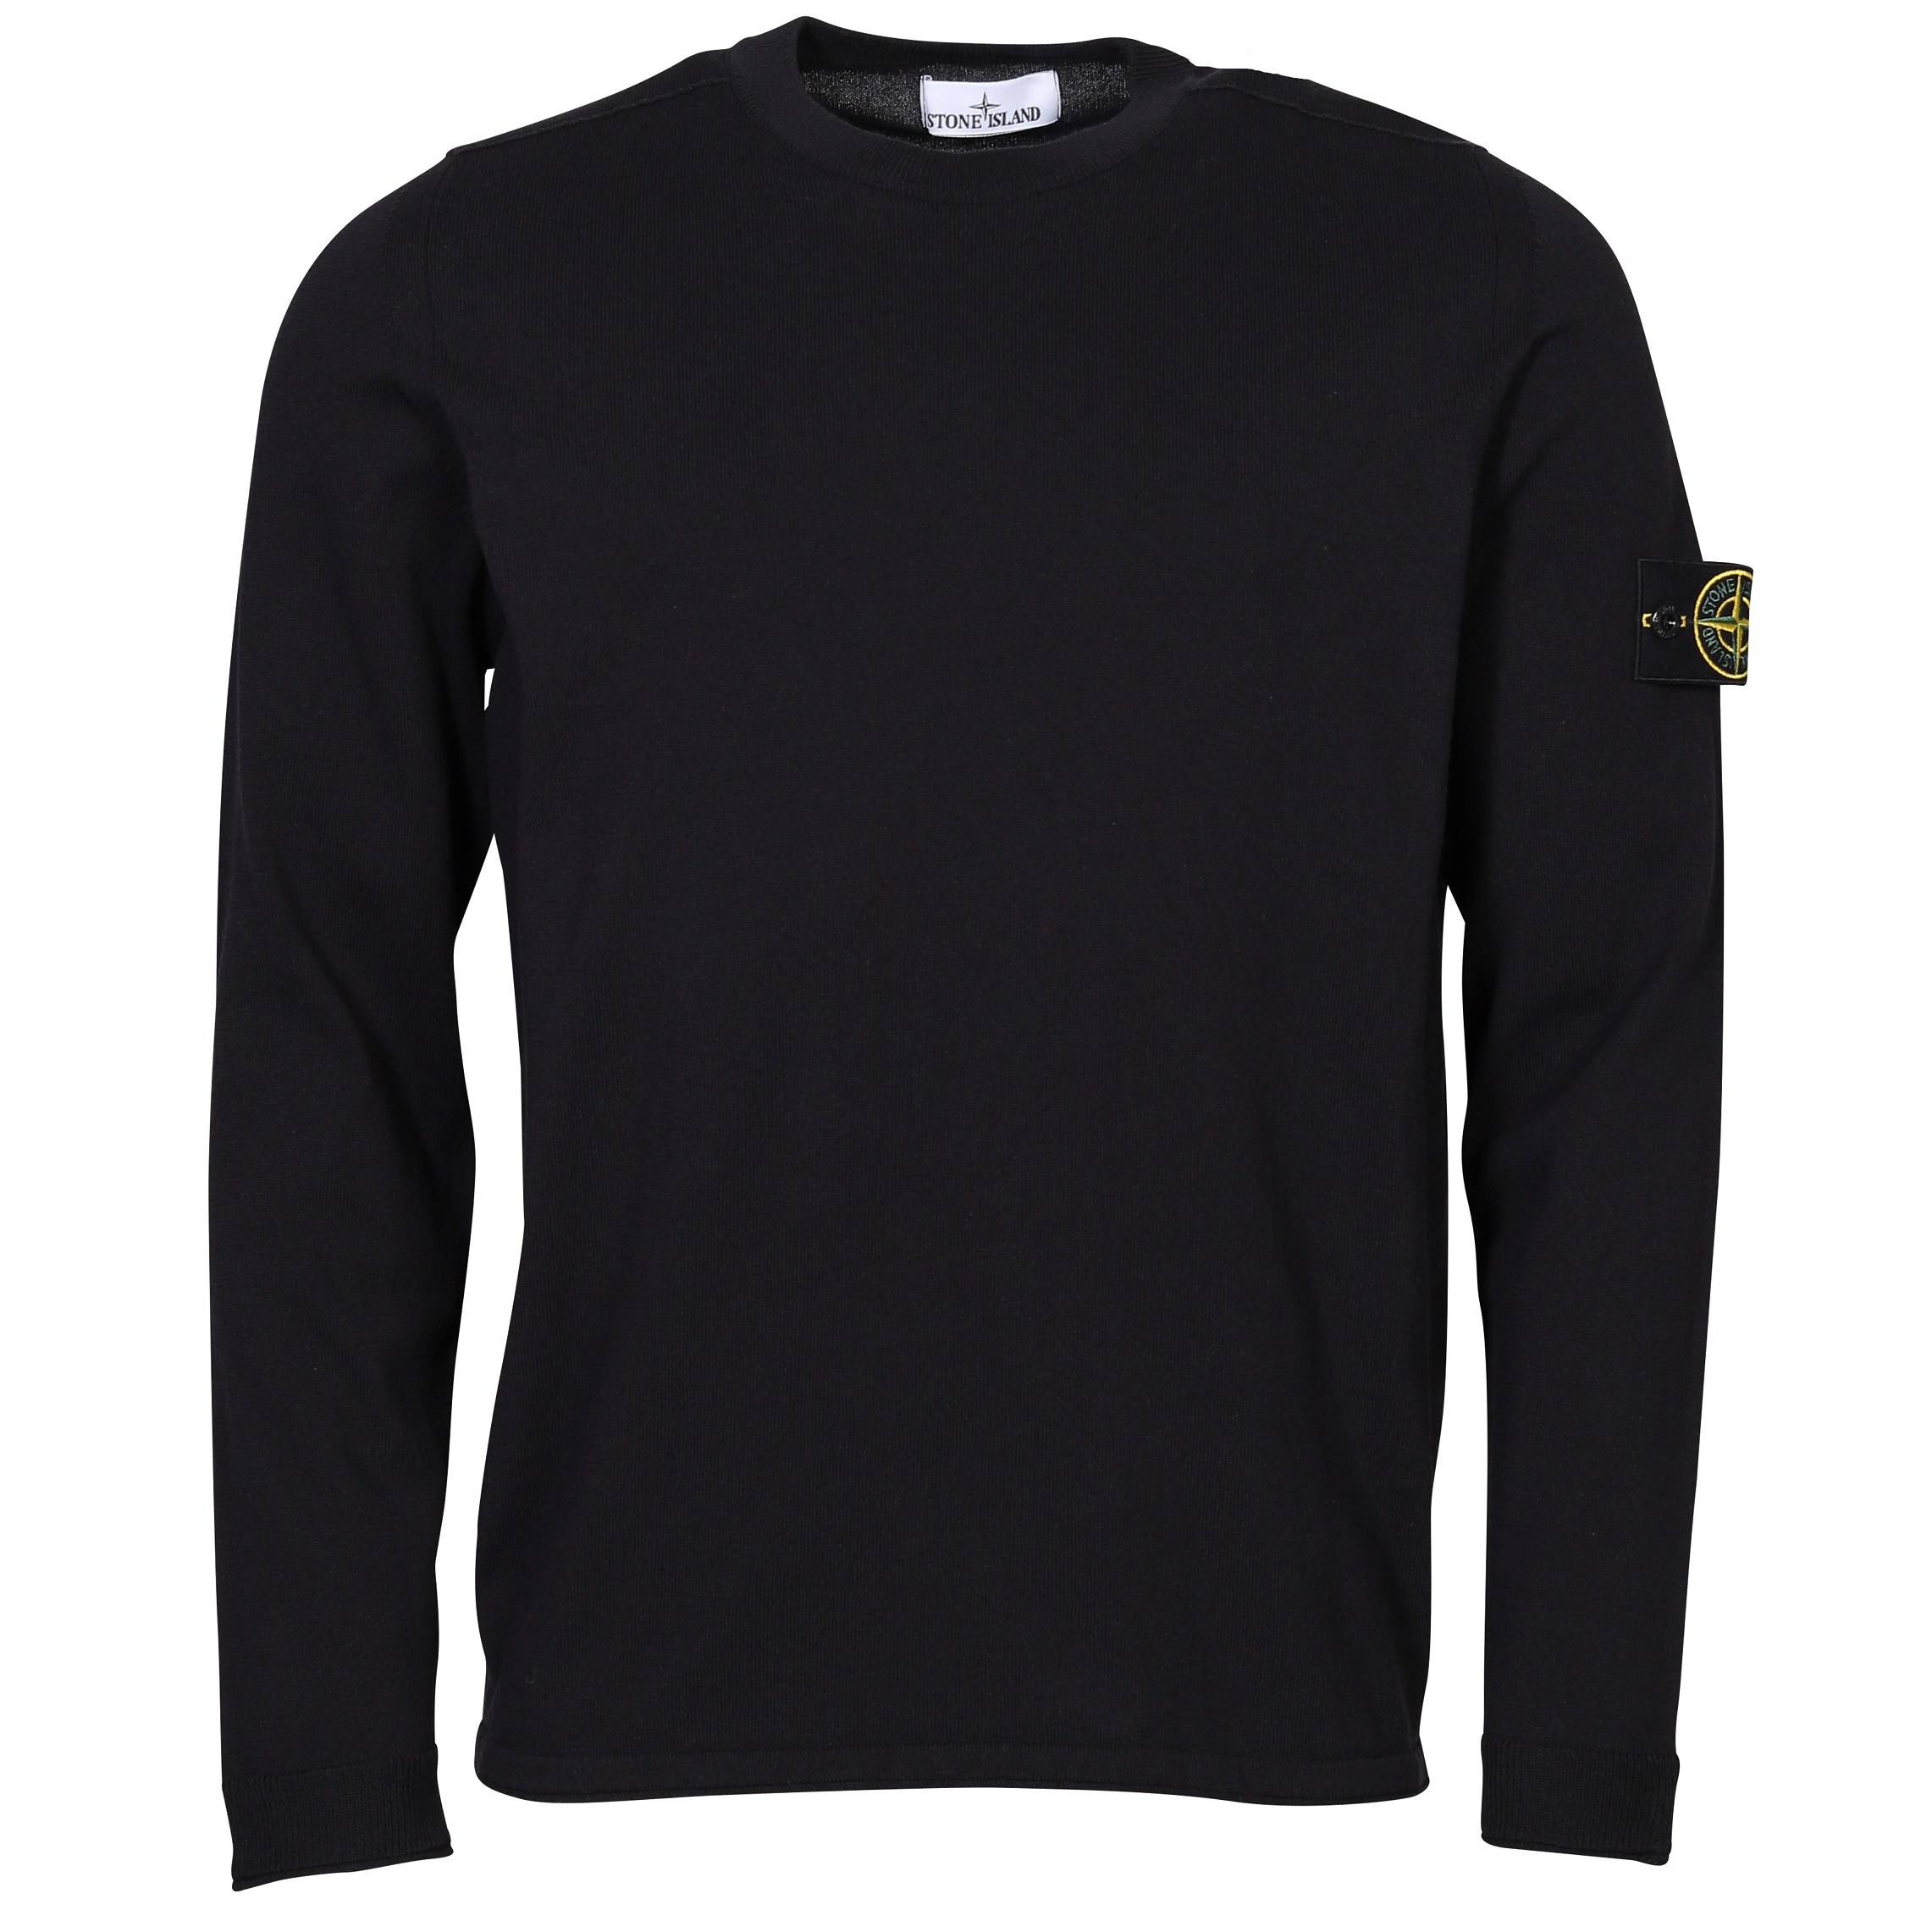 STONE ISLAND Cotton Knit Pullover in Navy Blue 3XL